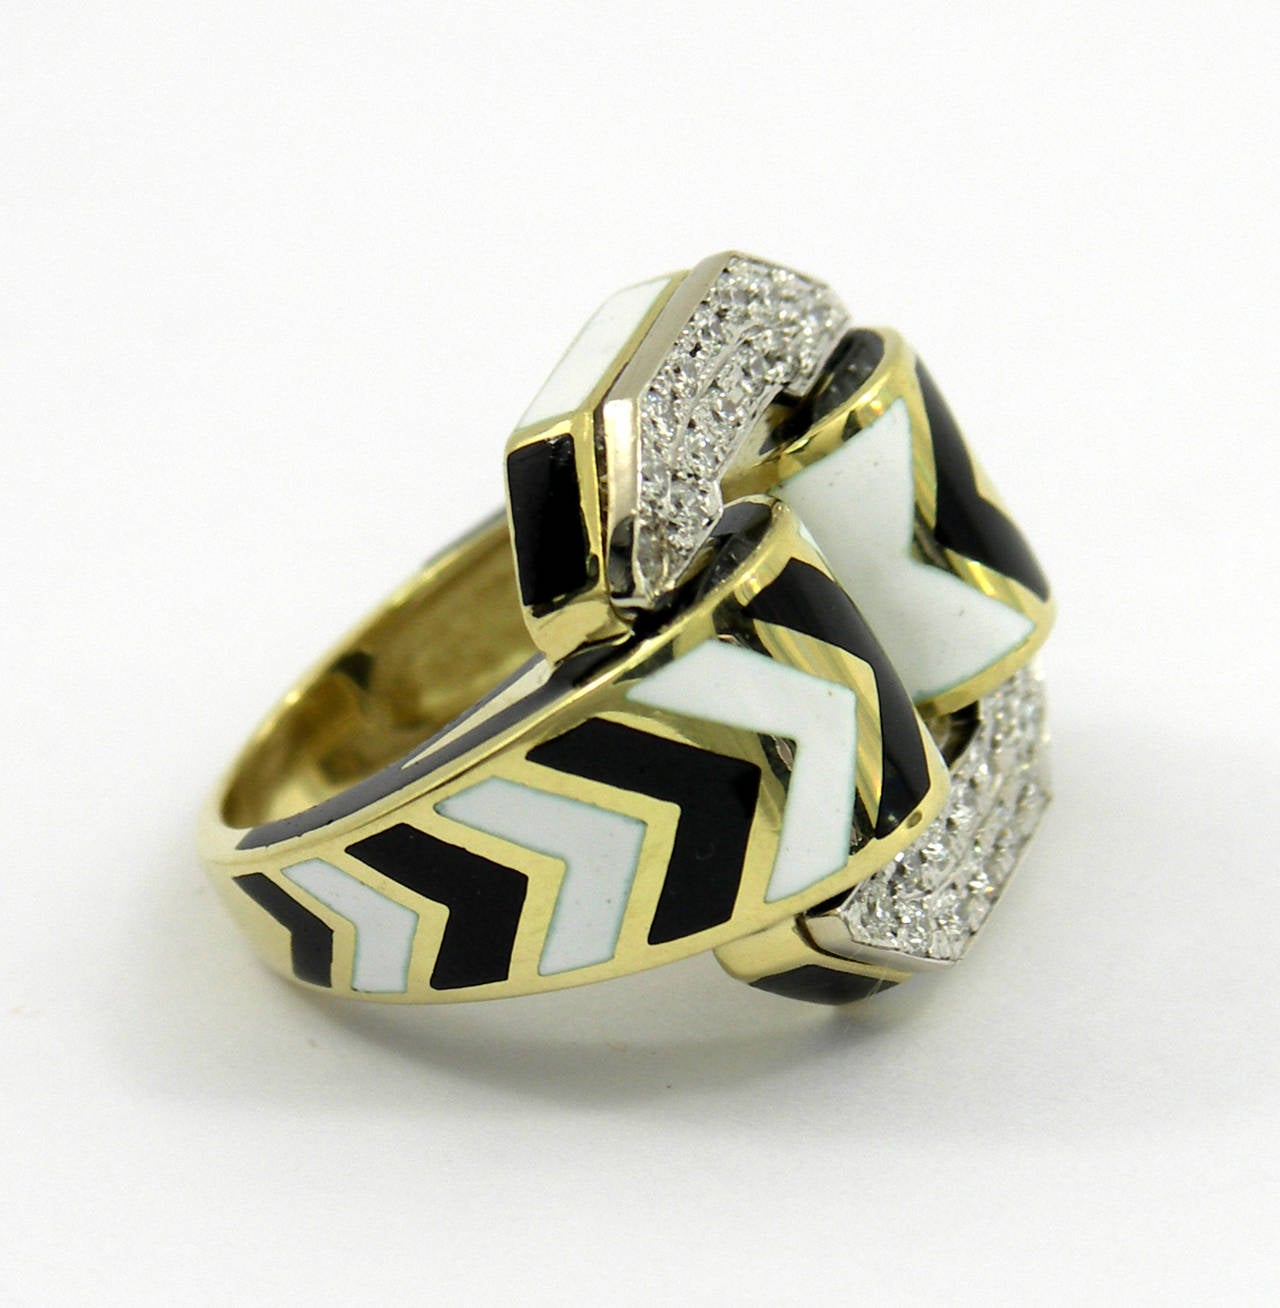 A captivating ring by David Webb crafted in 18K yellow gold, that has been beautifully enameled with alternating black and white chevrons. This stylish ring also has two platinum plates which have been set with assorted round brilliant cut diamonds